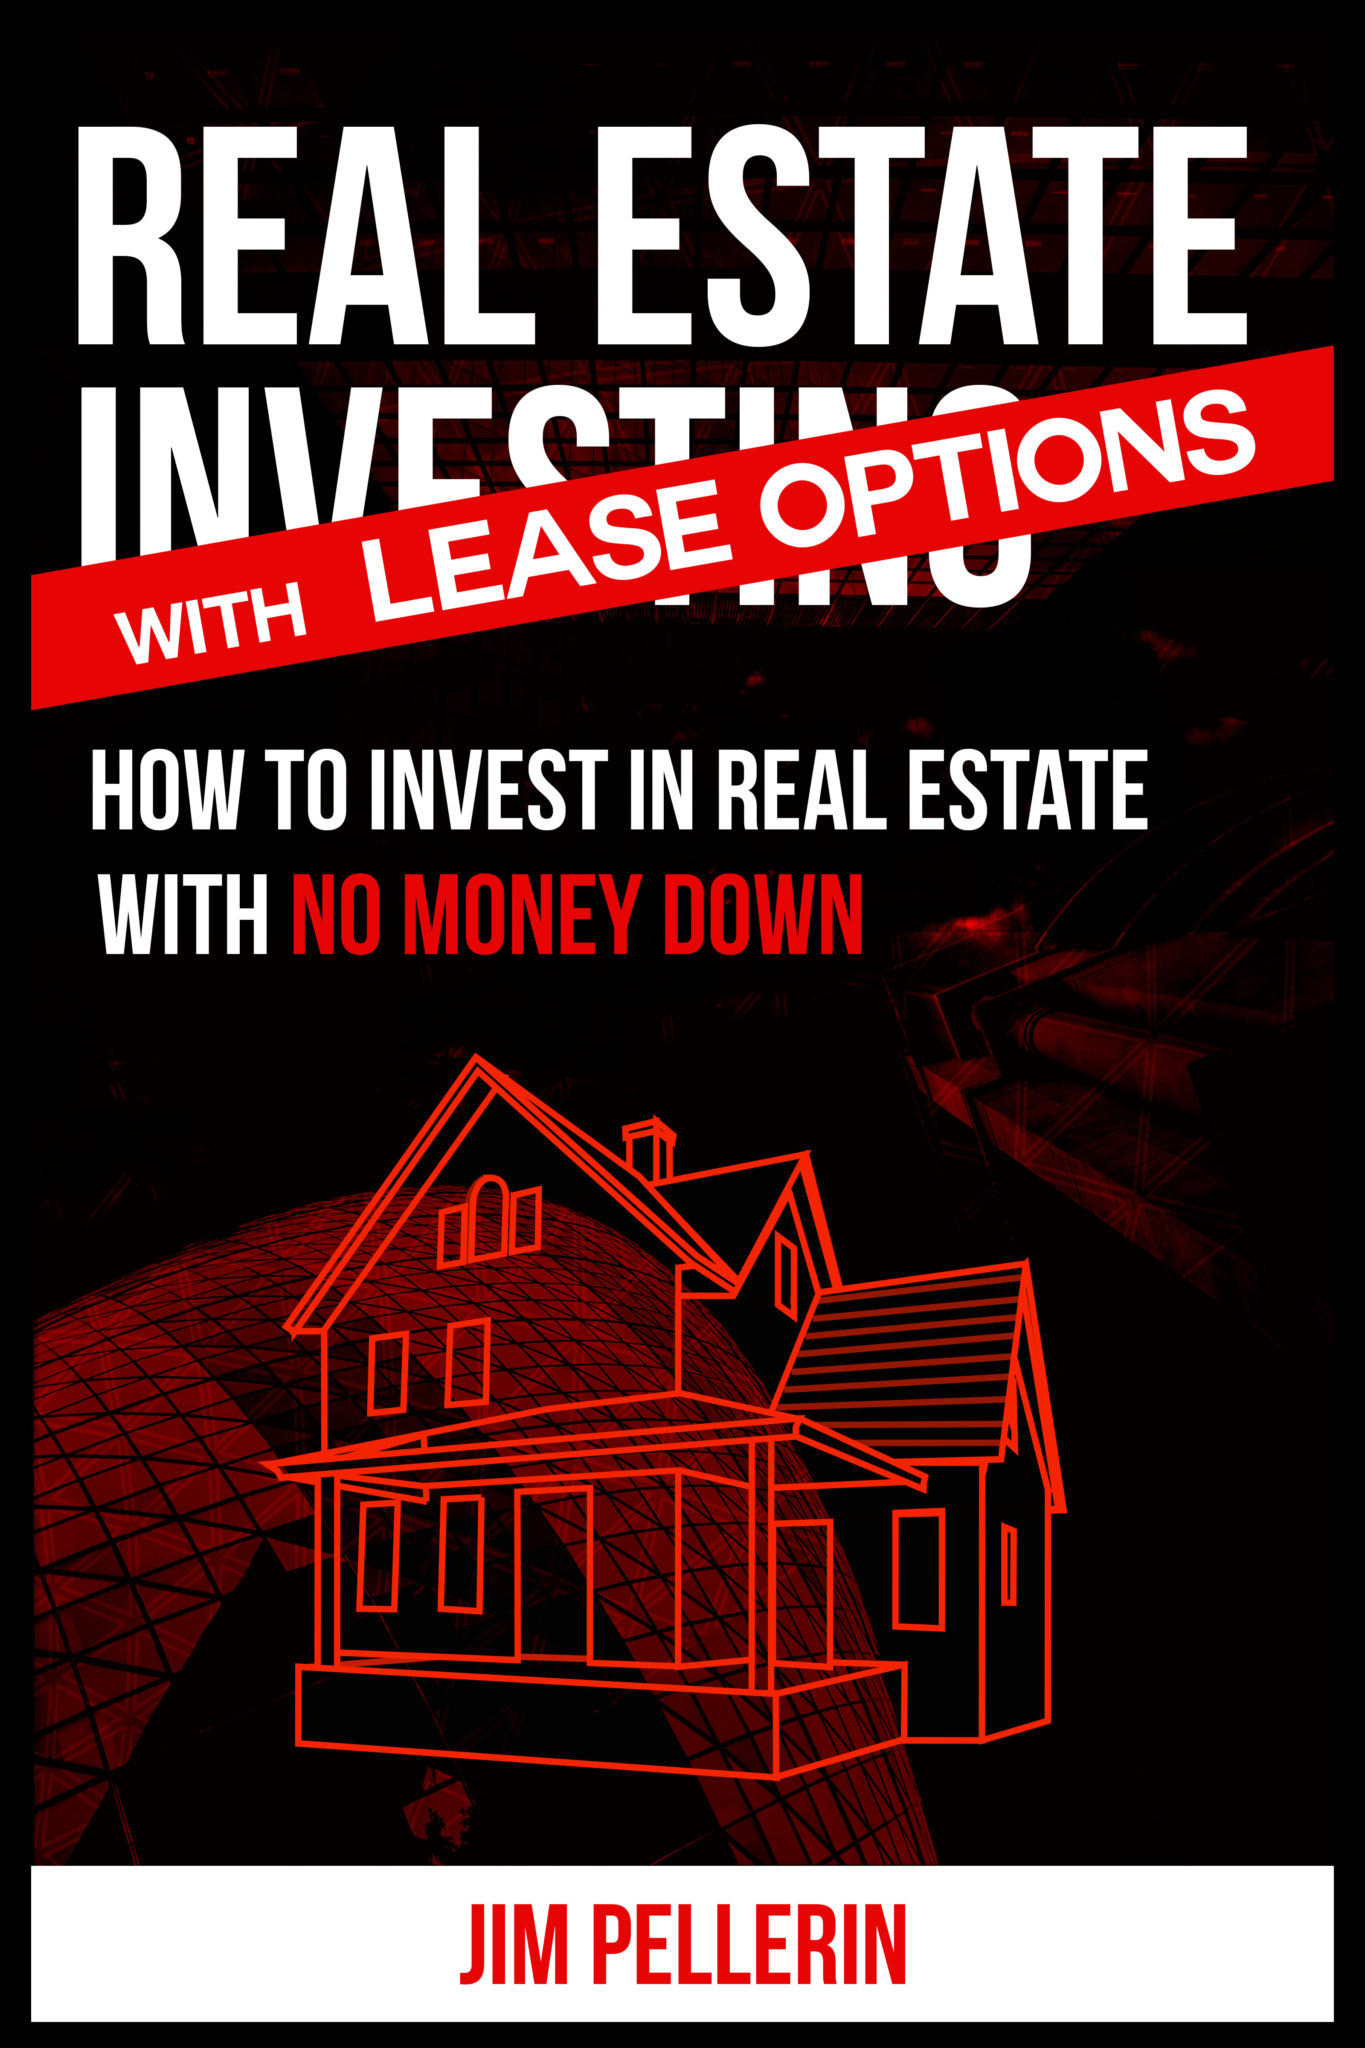 FREE: Real Estate Investing with Lease Options: How to Invest with No Money Down by Jim Pellerin